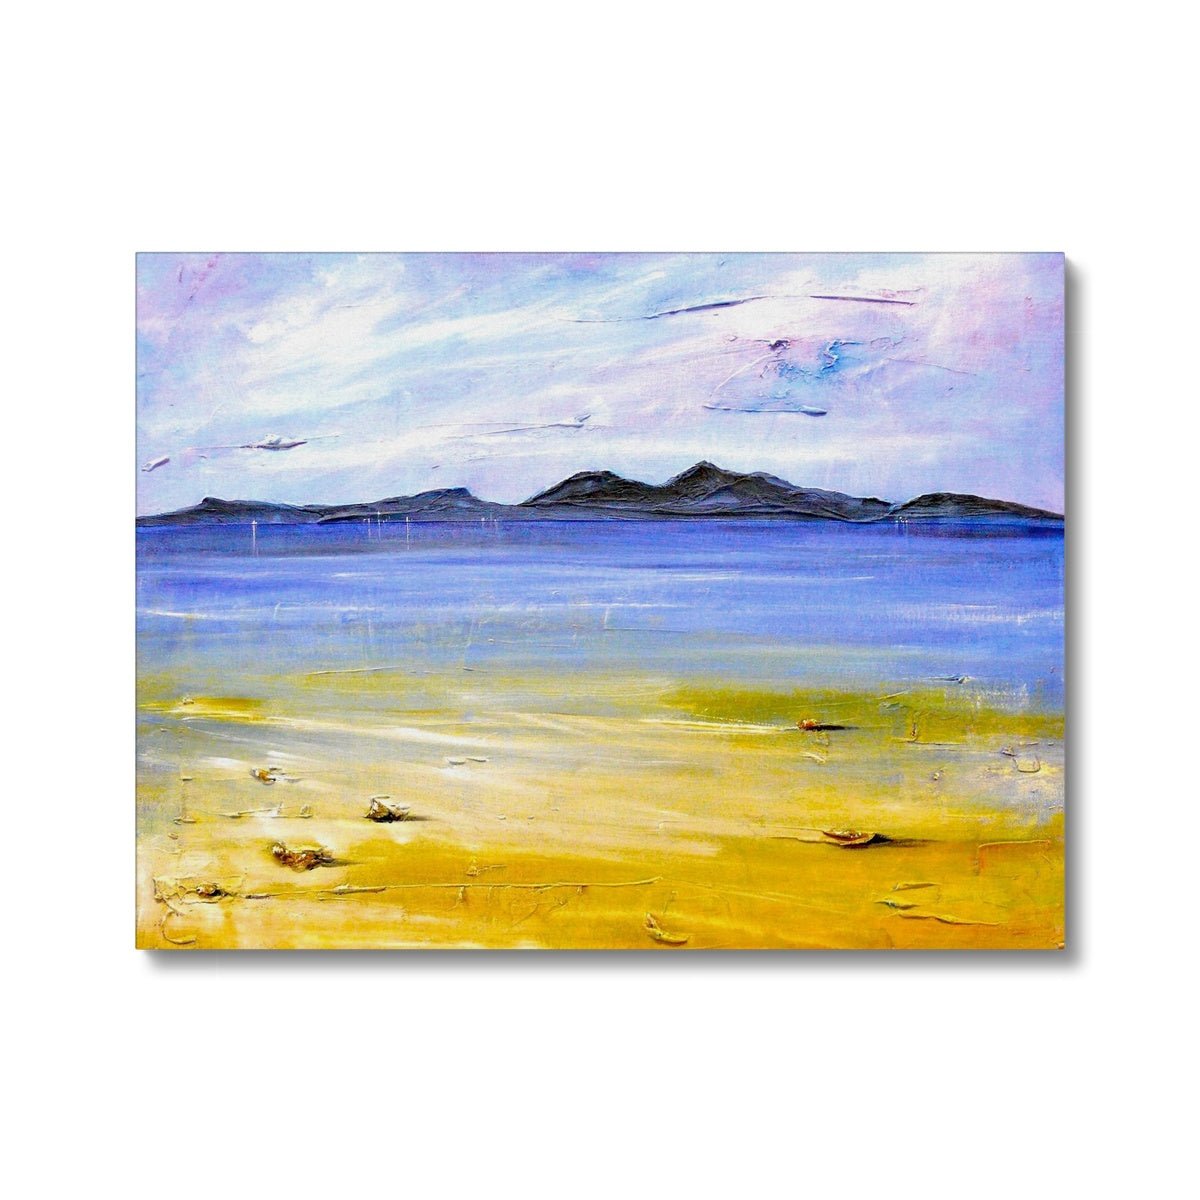 Camusdarach Beach Arisaig Painting | Canvas From Scotland-Contemporary Stretched Canvas Prints-Scottish Highlands & Lowlands Art Gallery-24"x18"-Paintings, Prints, Homeware, Art Gifts From Scotland By Scottish Artist Kevin Hunter